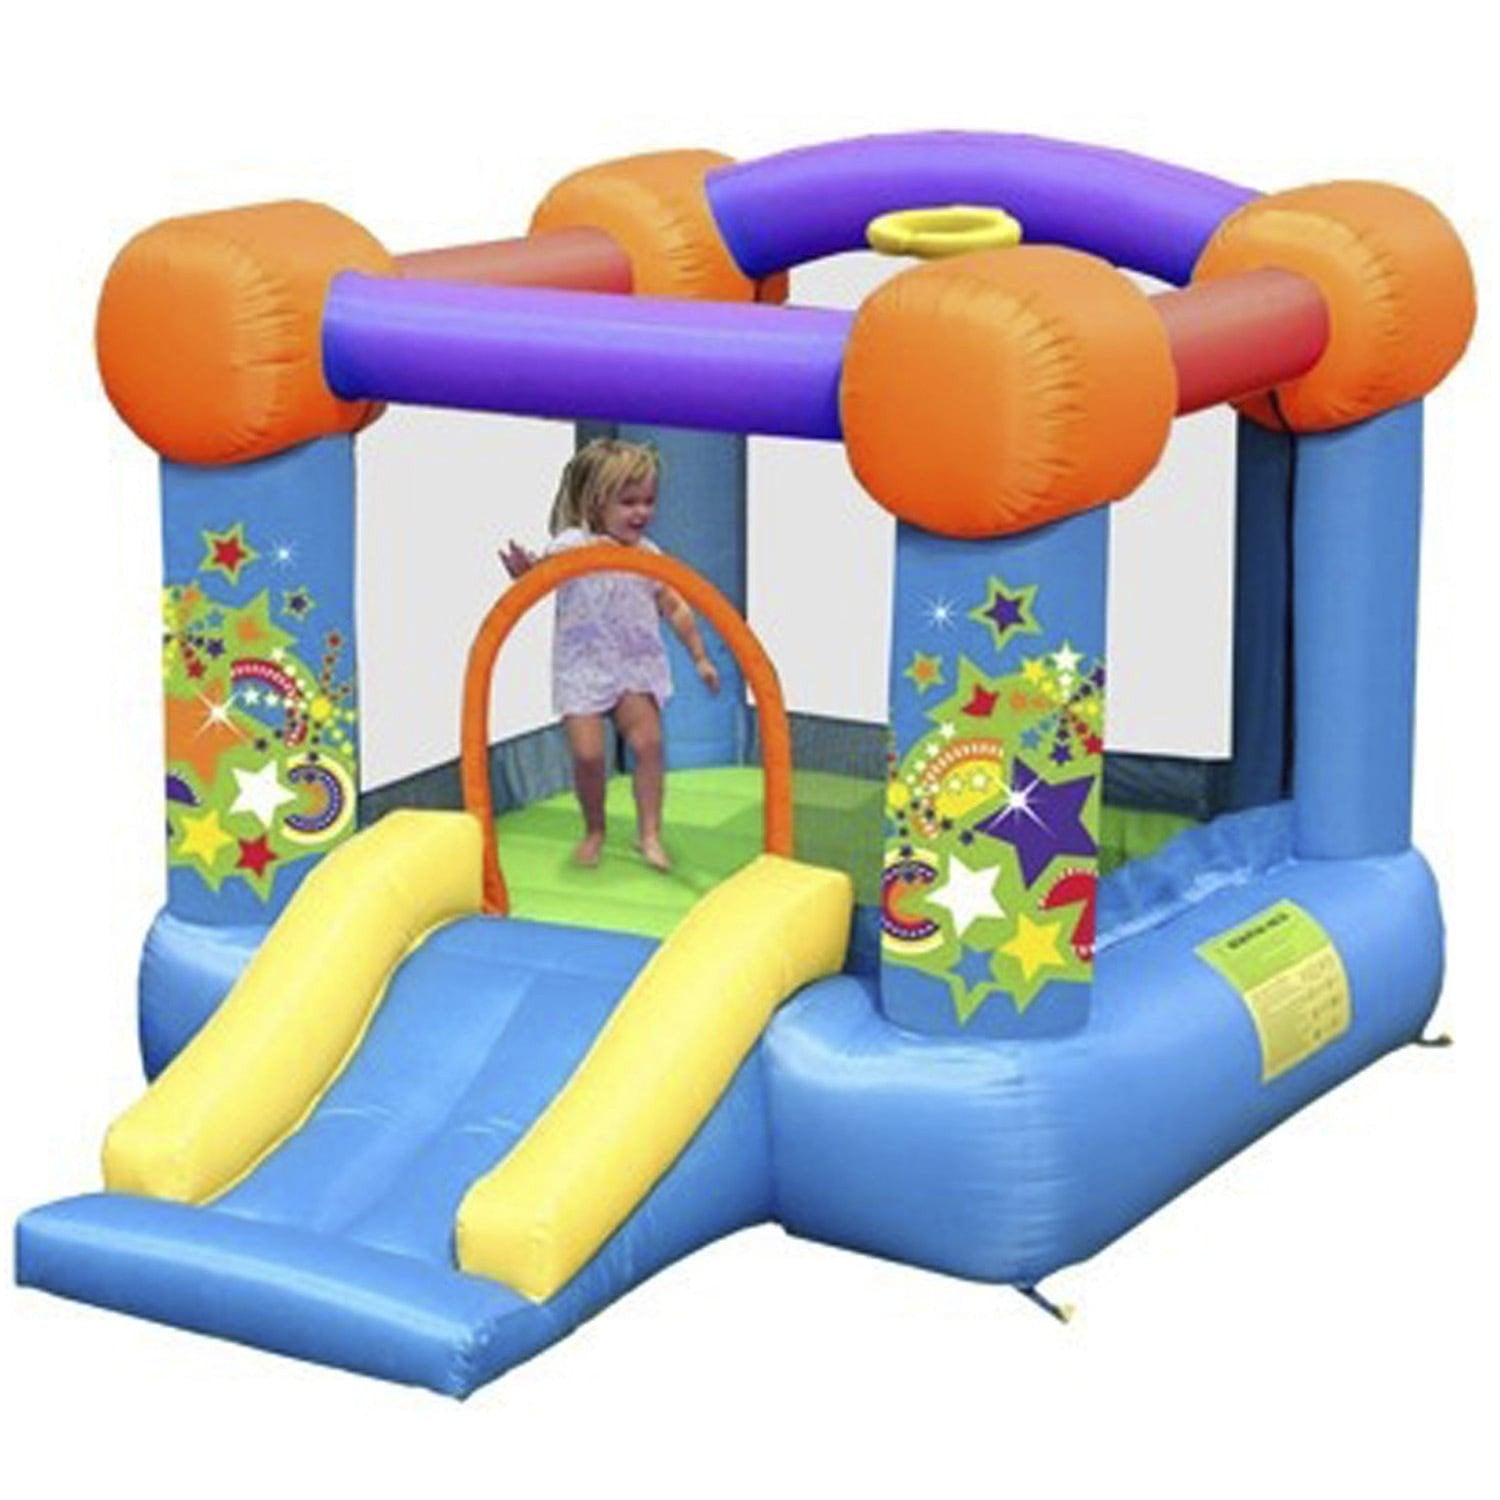 Kidwise Residential Bounce House KidWise Party Bouncer Bounce House With Slide KWSSD-9070